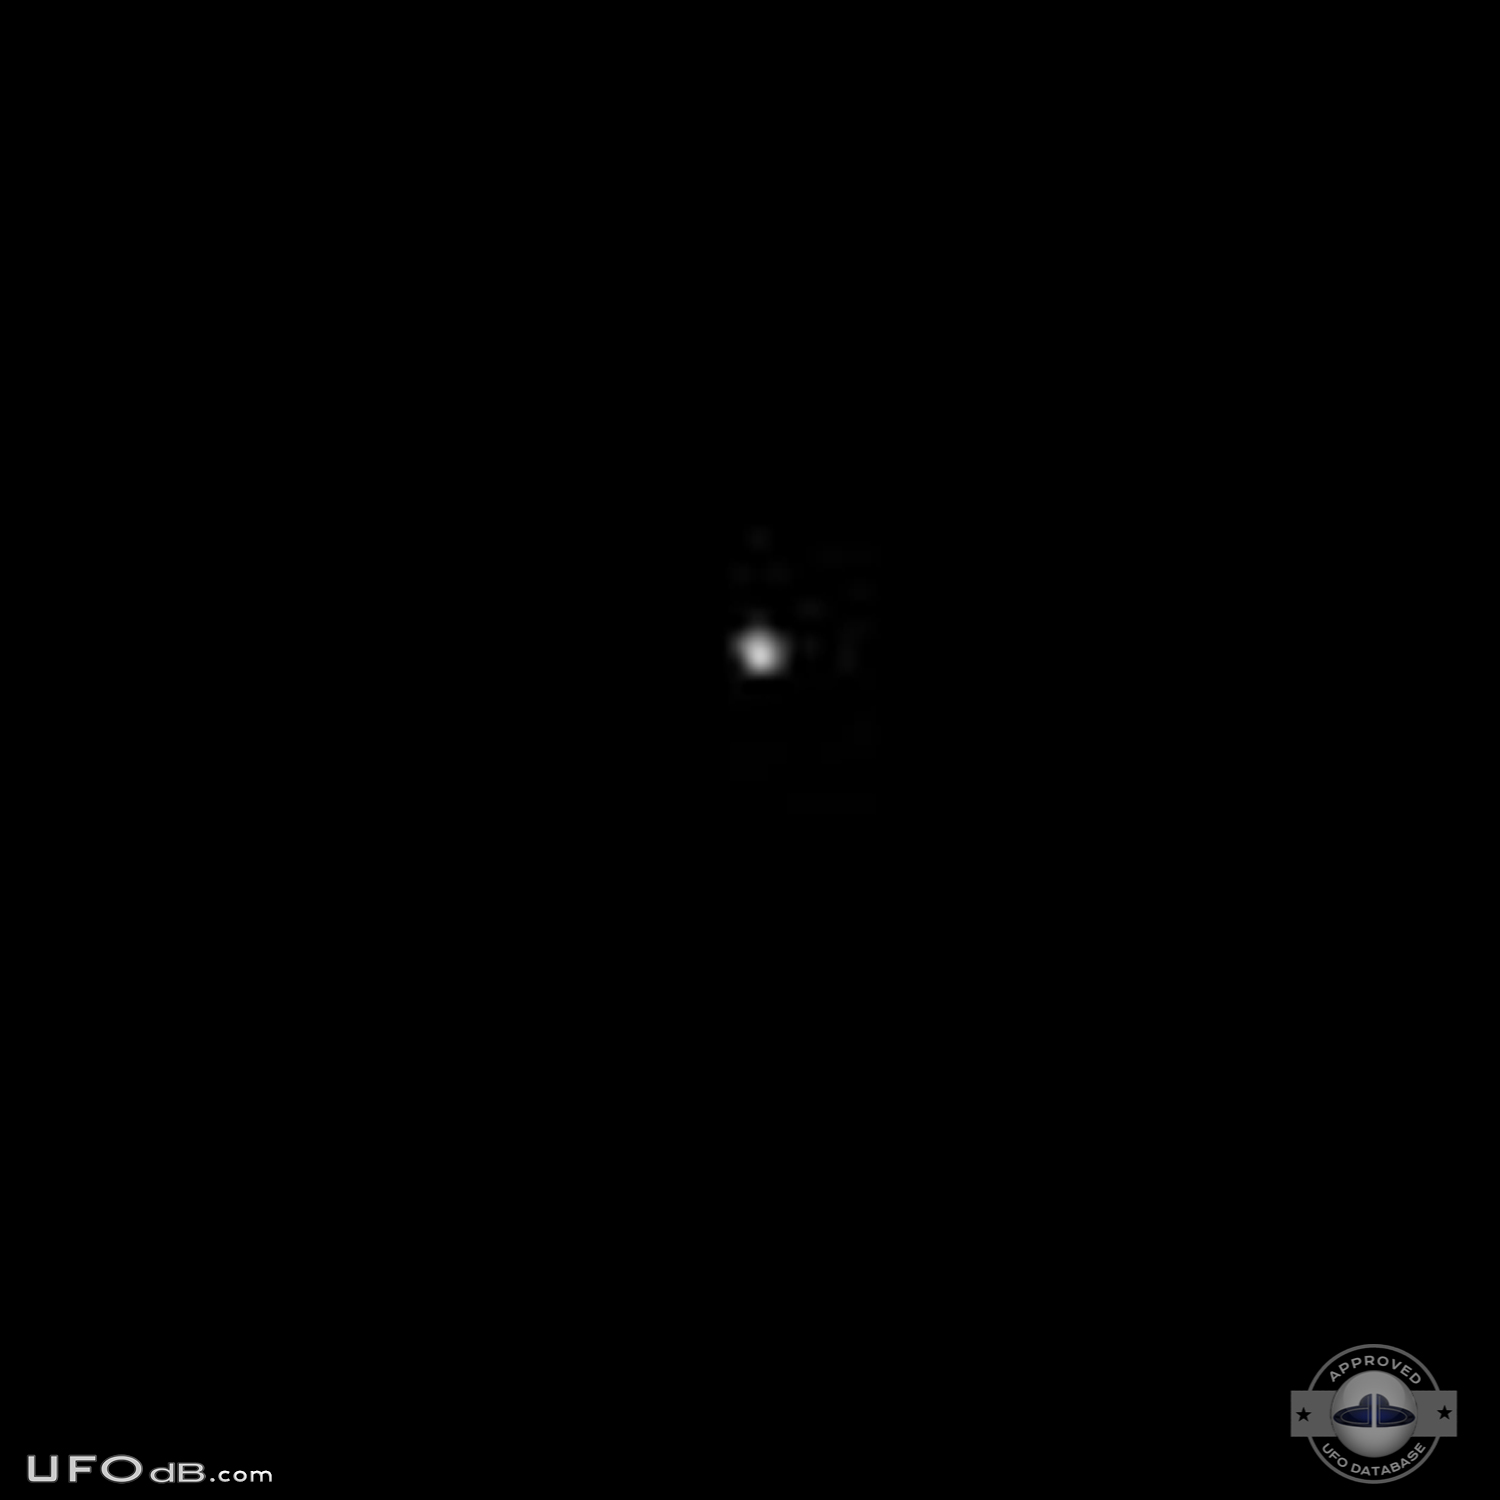 UFO changing shapes in the night over Concord in California - 2013 UFO Picture #544-3